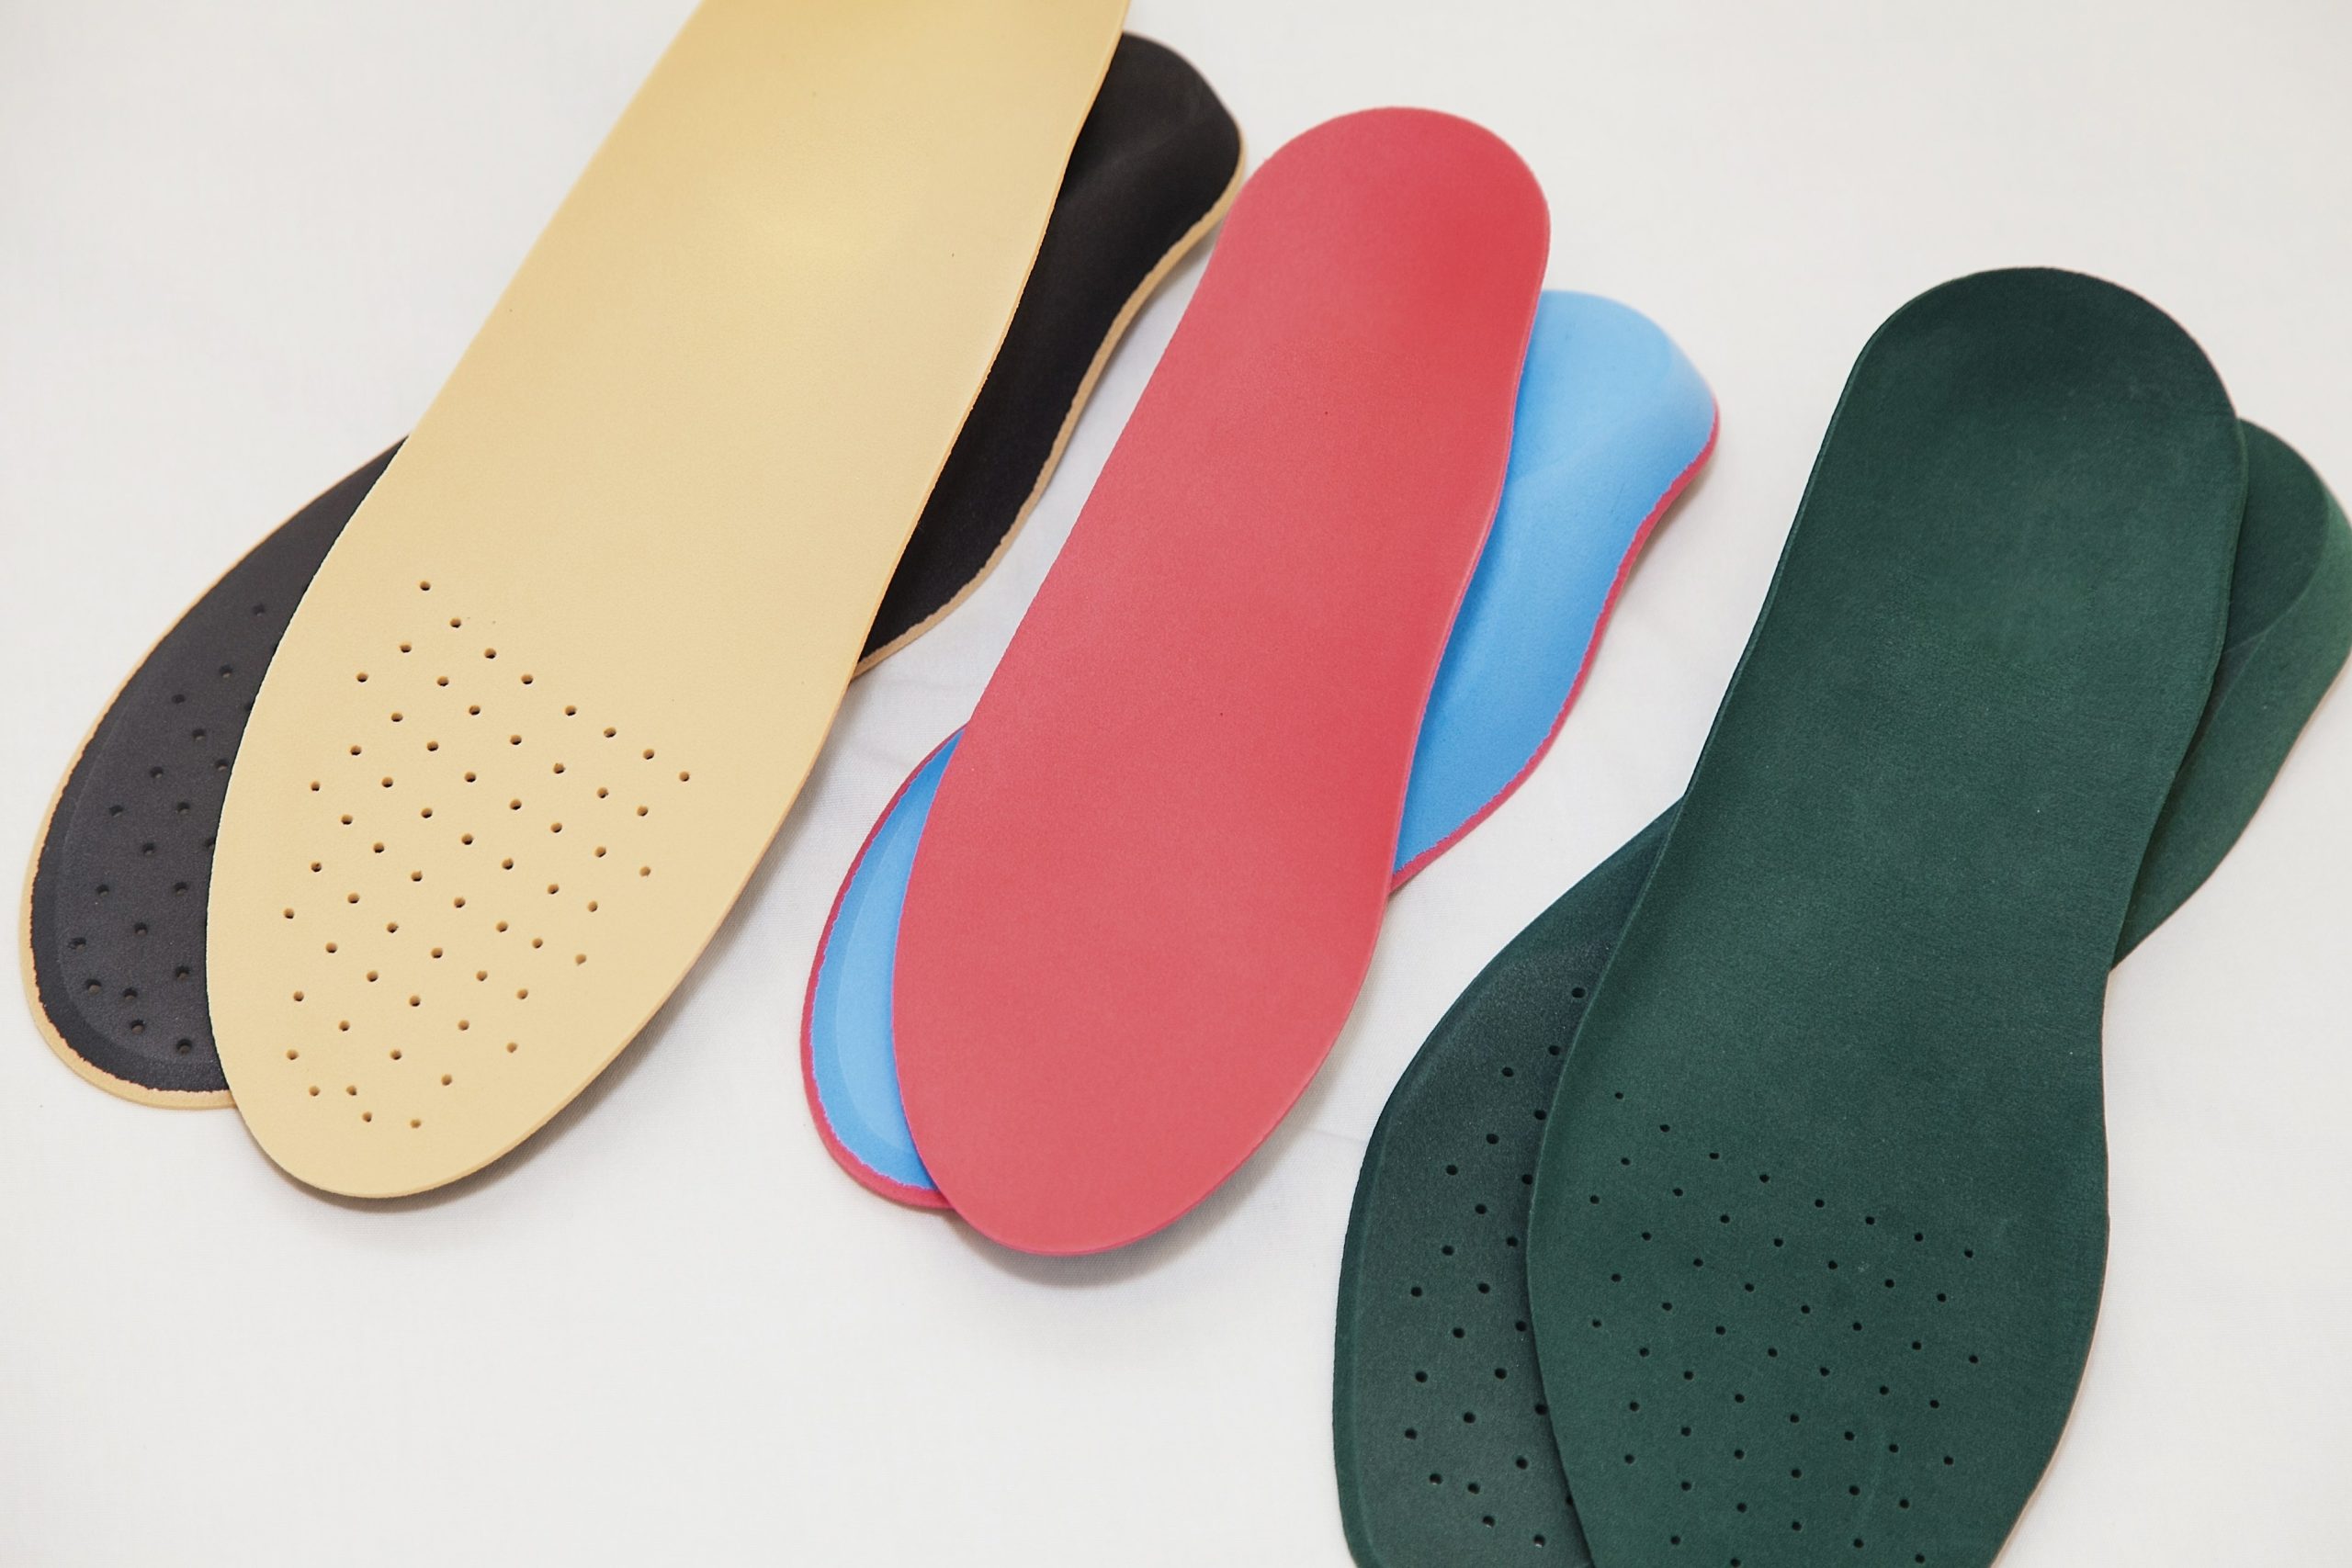 Different types of inserts for shoes, including over-the-counter and prescribed orthotics, for foot support and cushioning.